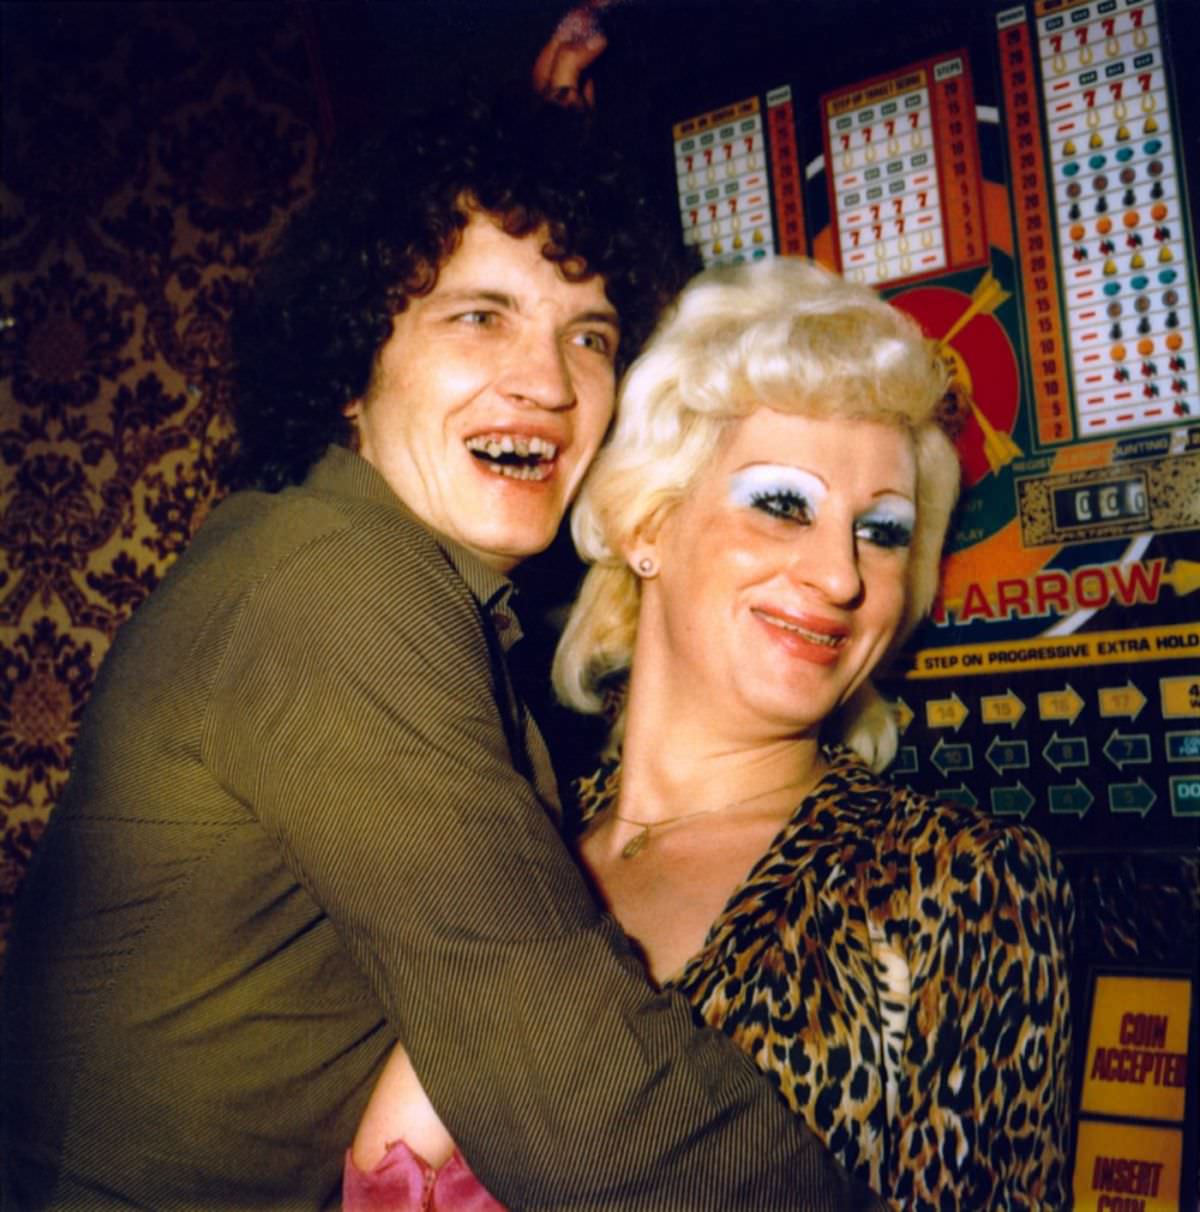 Vintage Photos of the Drunks and Weirdos in Amsterdam’s Red Light District Bars in the 1980s